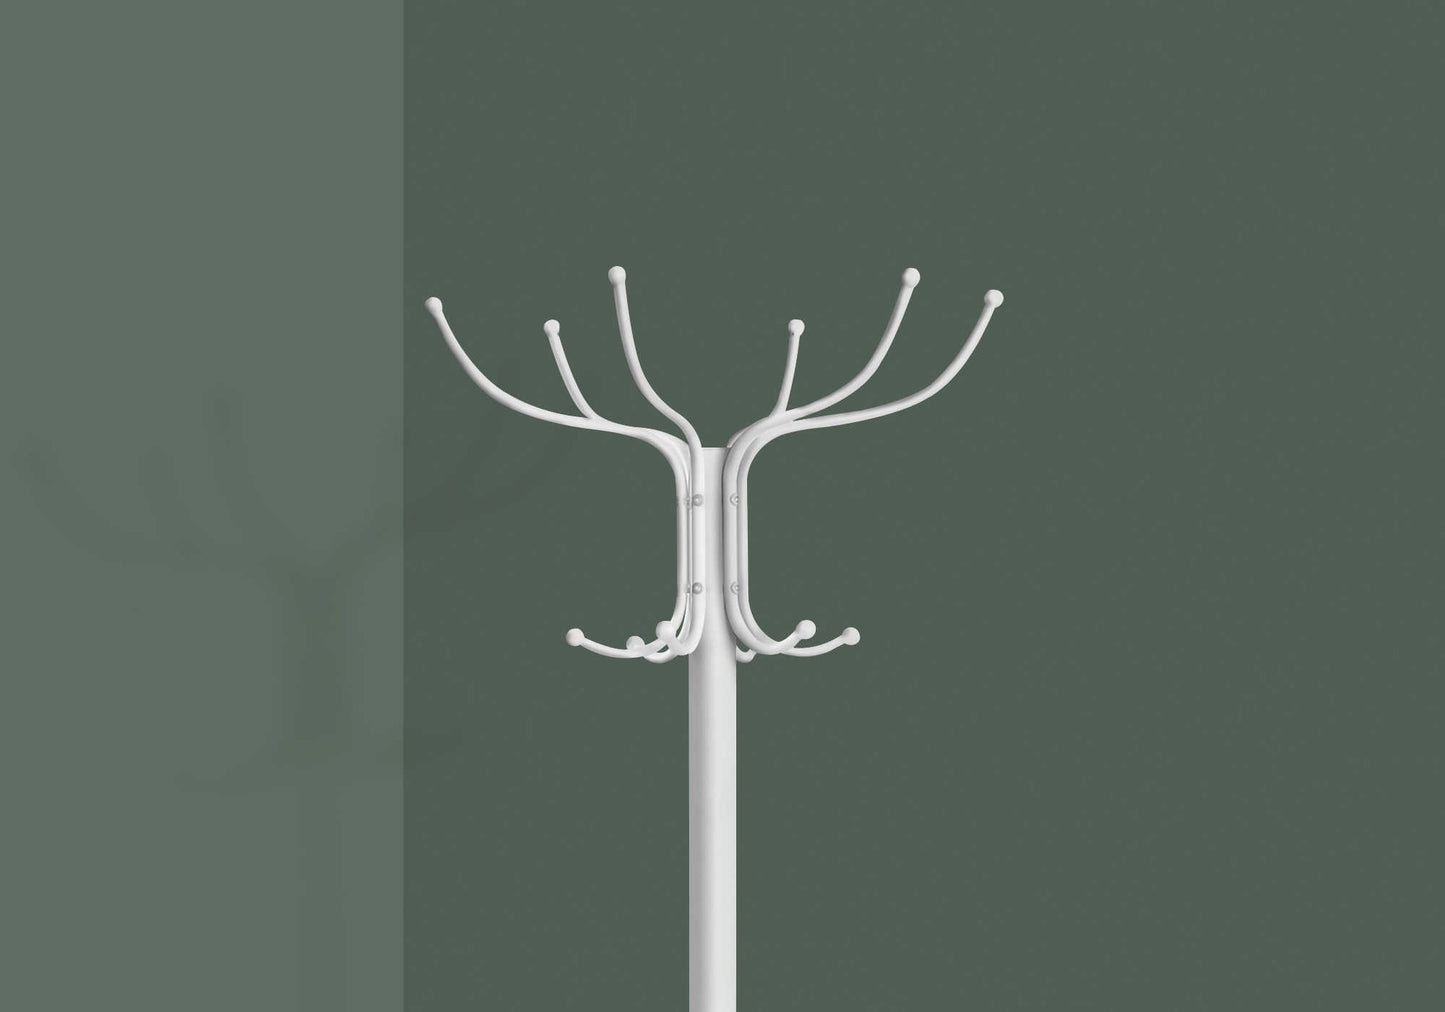 Monarch Specialties - Modern 12 Hook Metal Coat Rack in White Finish with Umbrella Holder - I 2030